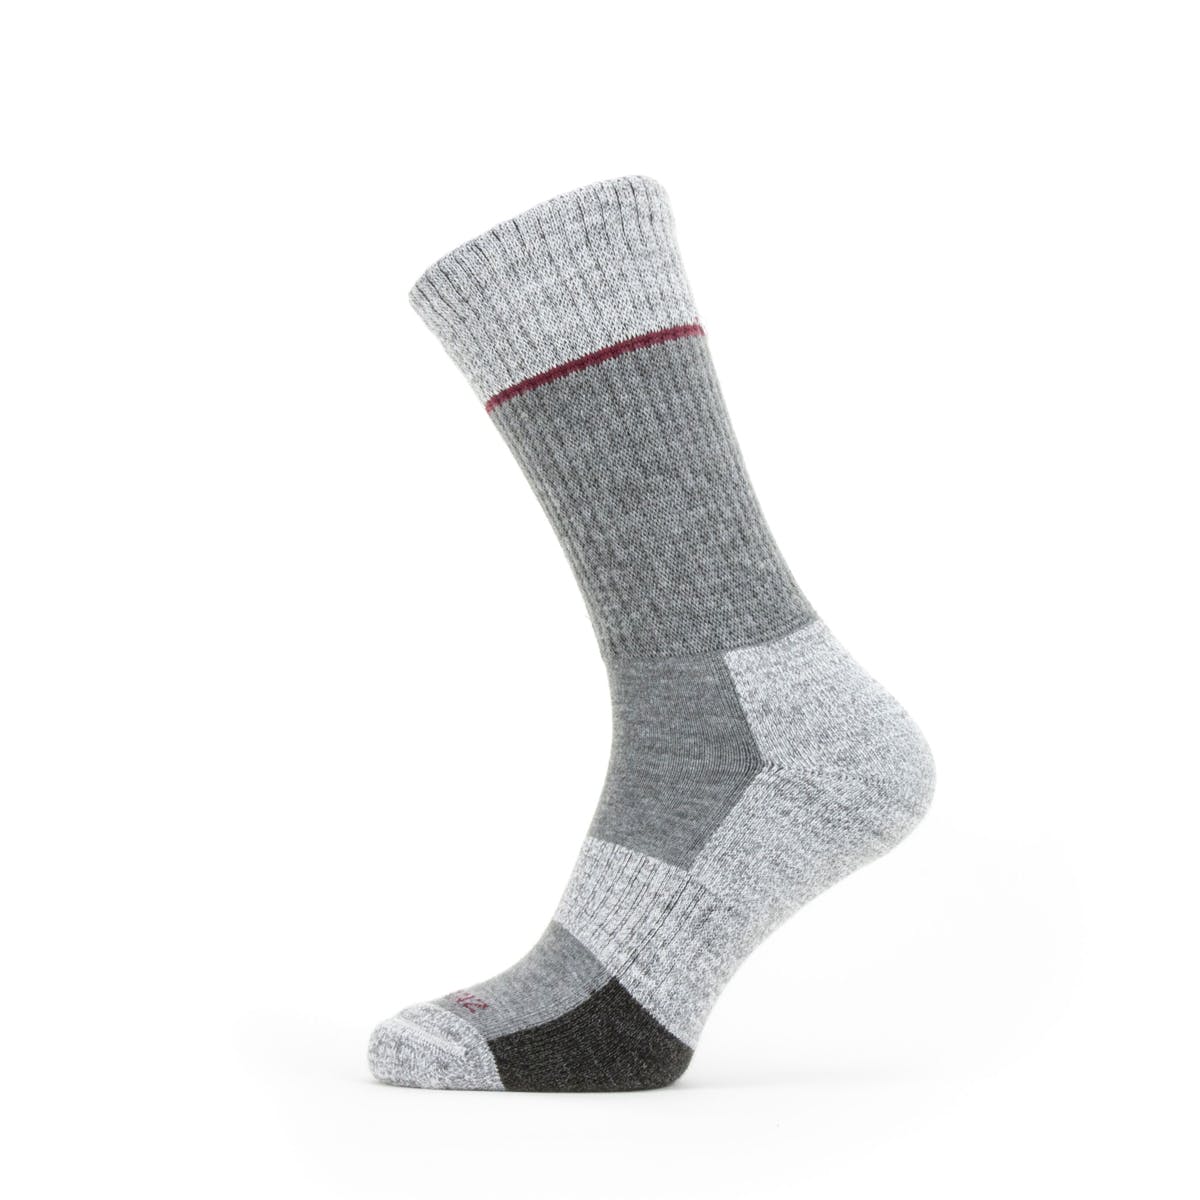 Solo QuickDry Mid Length Socks - Size: S - Color: Grey / White / Red